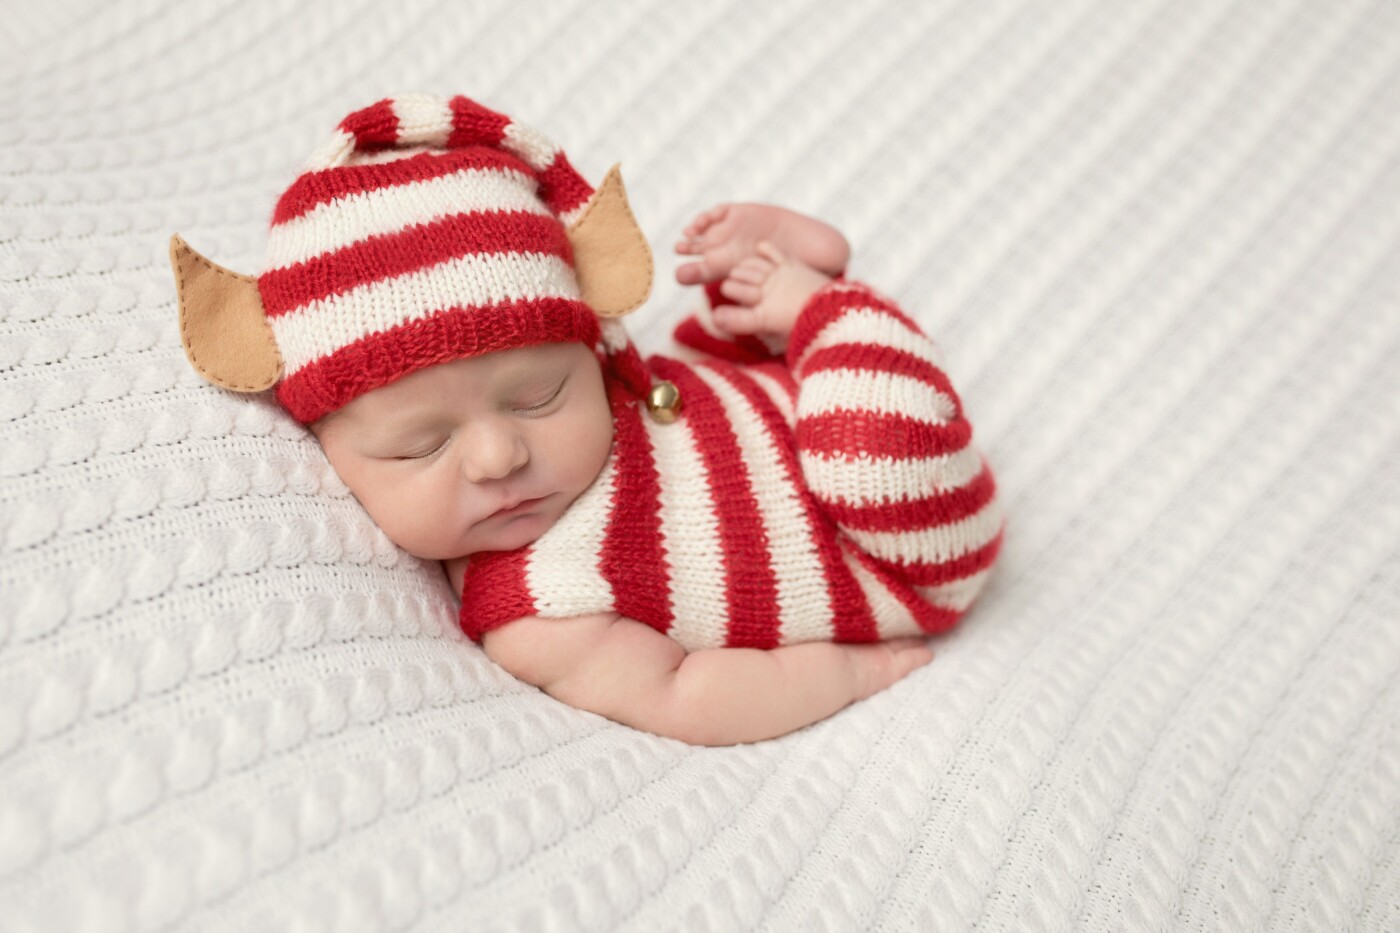 This sweet little elf was just 10 days old at her newborn photo shoot.  She broke a two month long streak of newborn boys in the studio so we had a little extra fun with props and colors during her session.  With Christmas just a few weeks away, mom fell in love with this set up too.